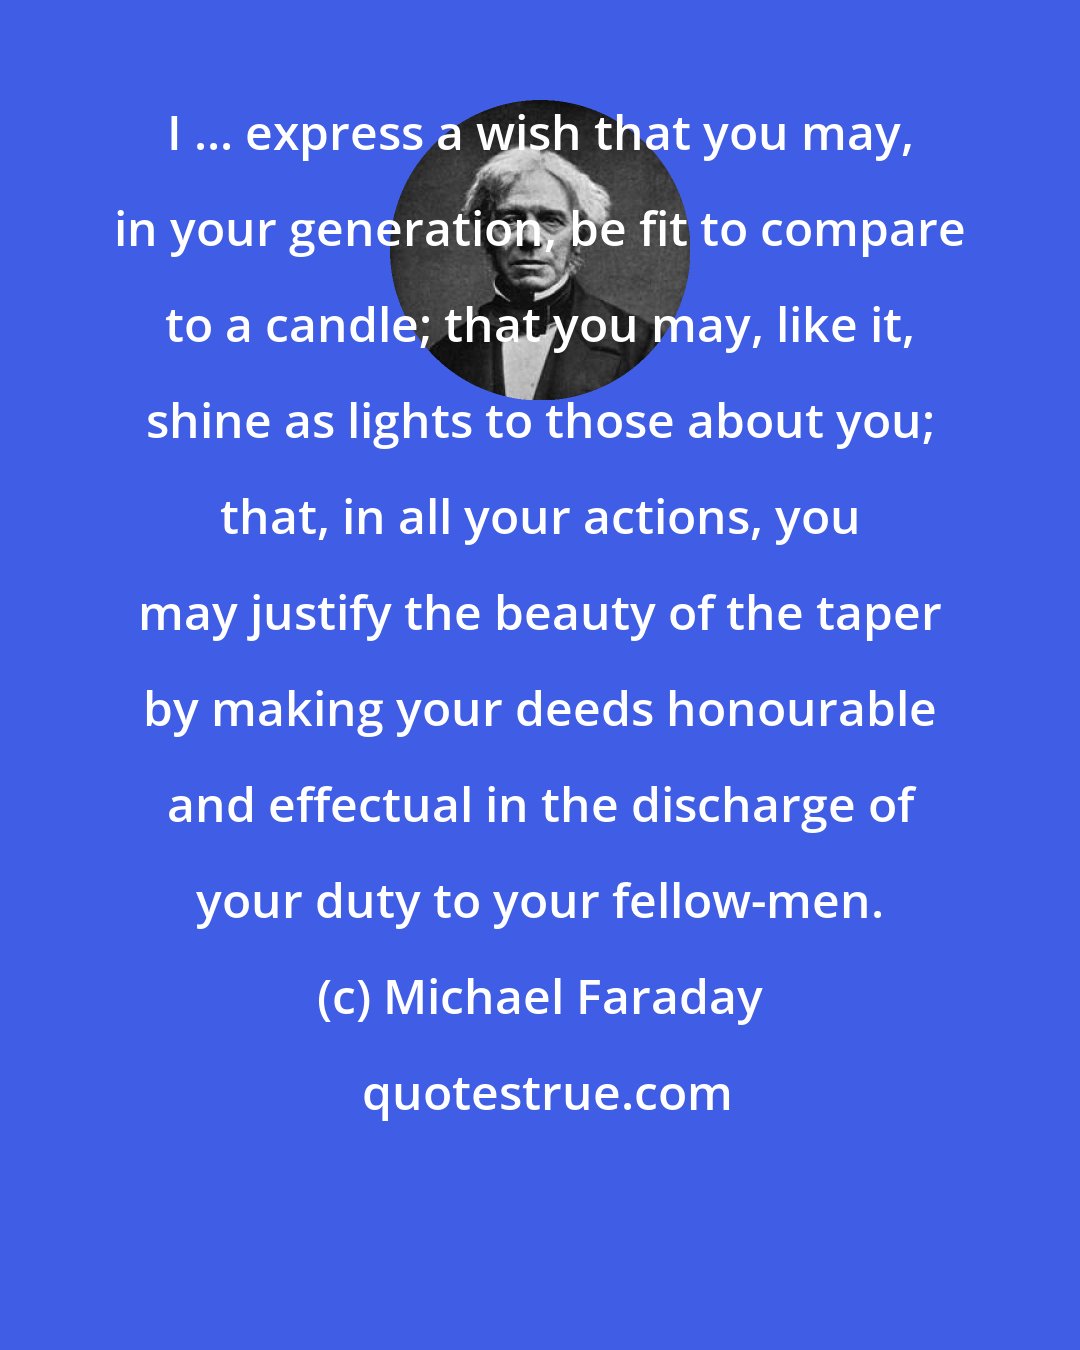 Michael Faraday: I ... express a wish that you may, in your generation, be fit to compare to a candle; that you may, like it, shine as lights to those about you; that, in all your actions, you may justify the beauty of the taper by making your deeds honourable and effectual in the discharge of your duty to your fellow-men.